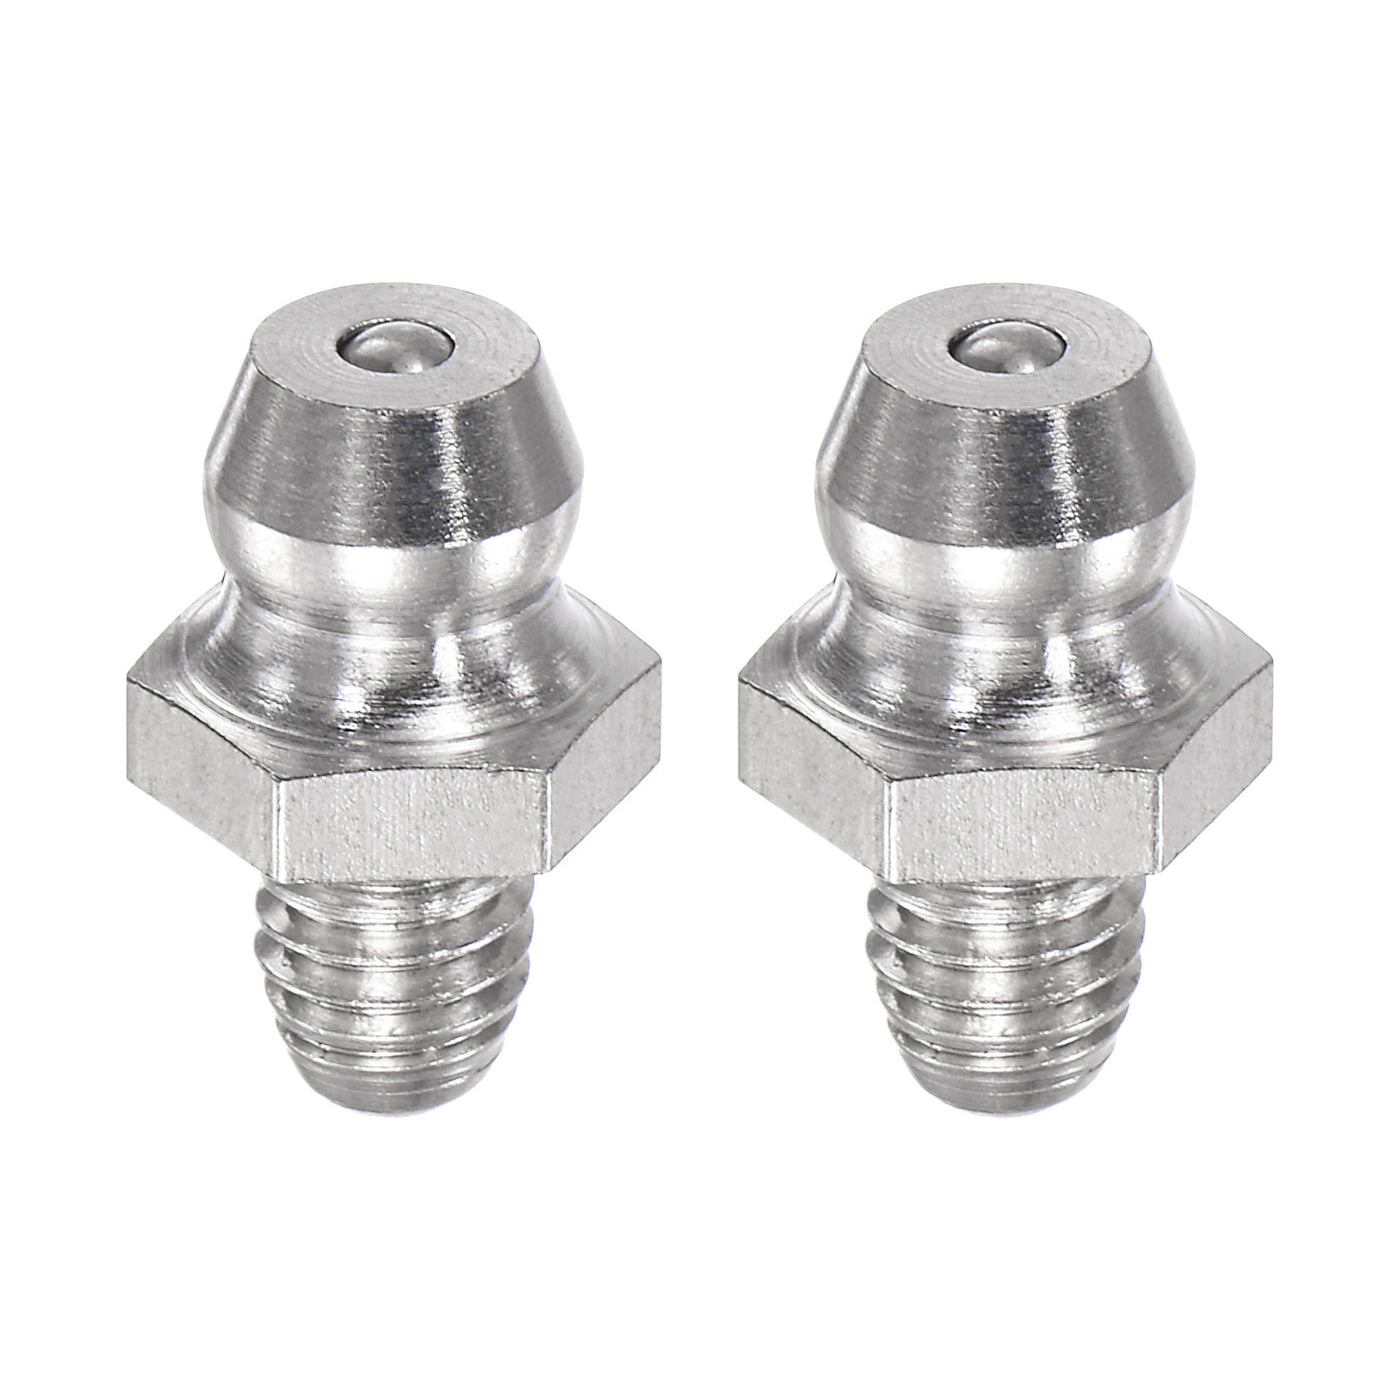 uxcell Uxcell 2Pcs Metric Stainless Steel Straight Hydraulic Grease Fitting M5 x 0.8mm Thread